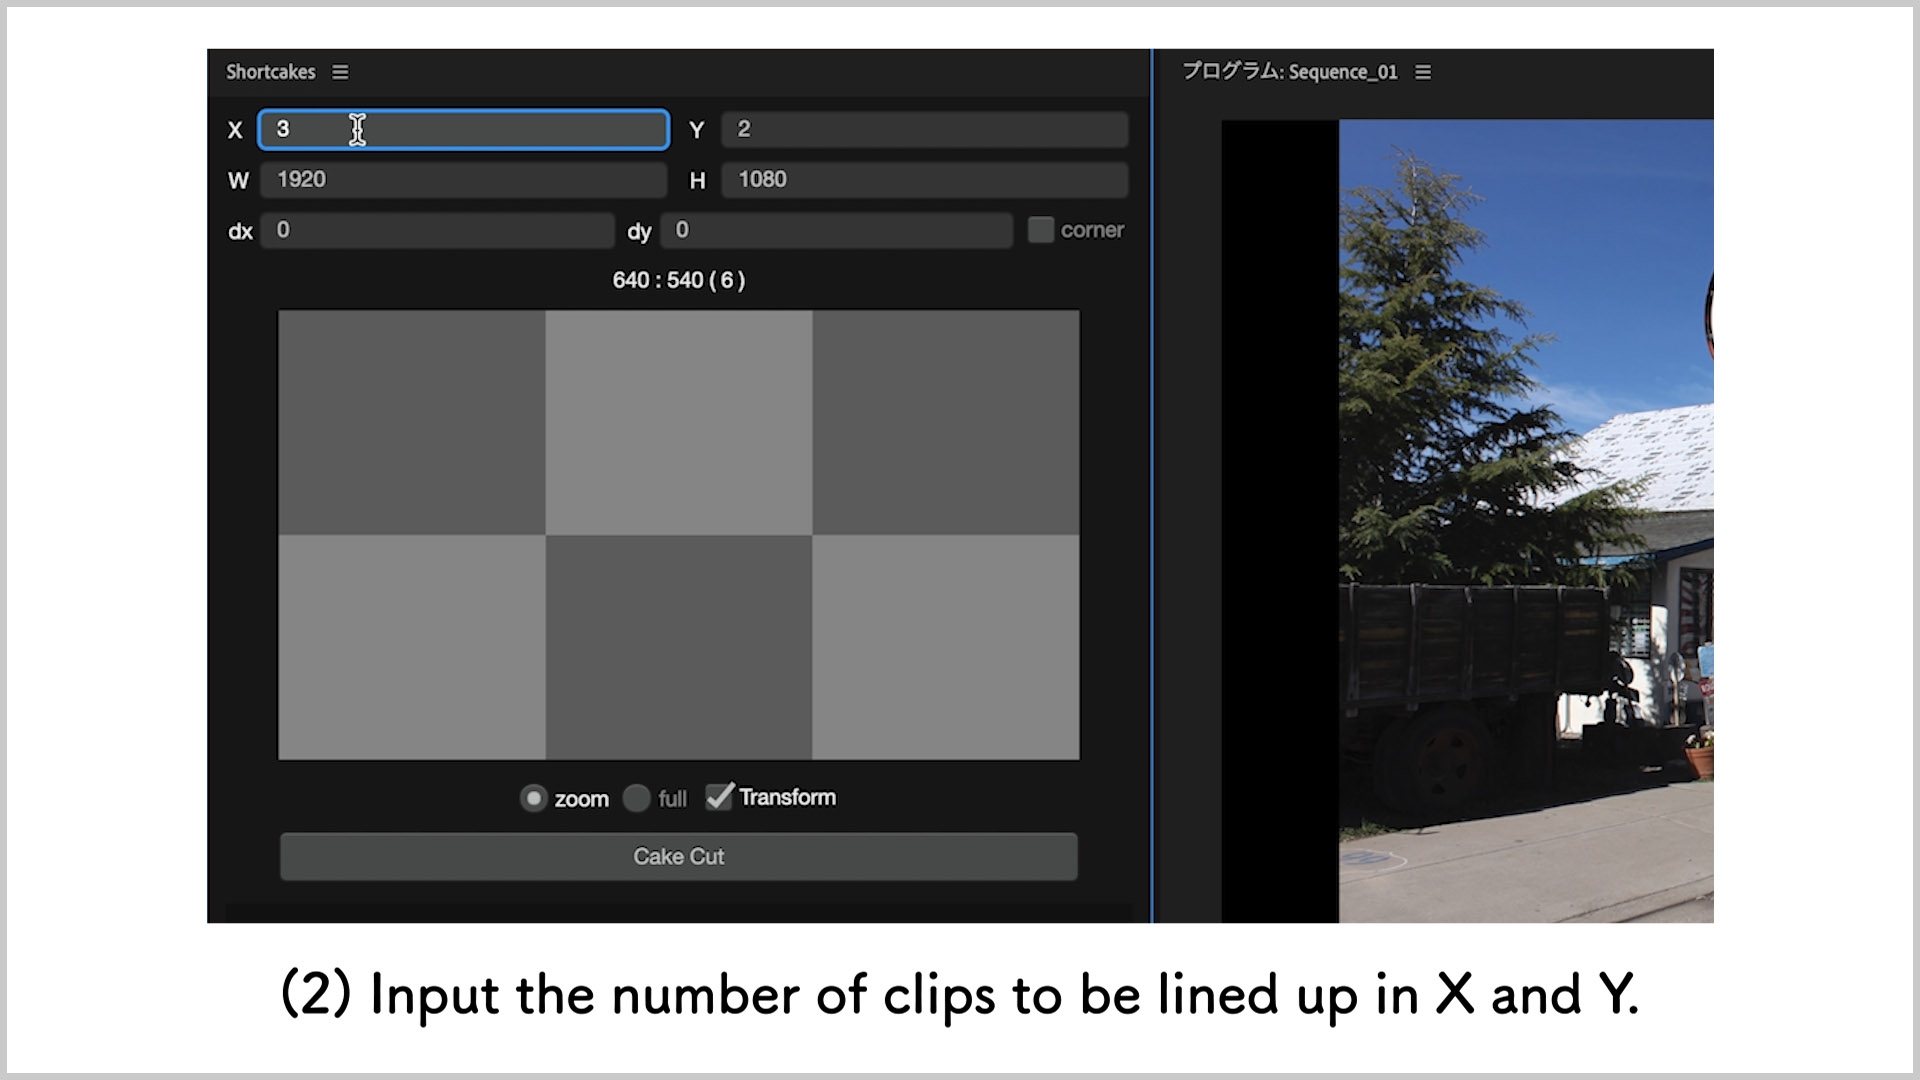 2. Input the number of clips to be lined up in X and Y.